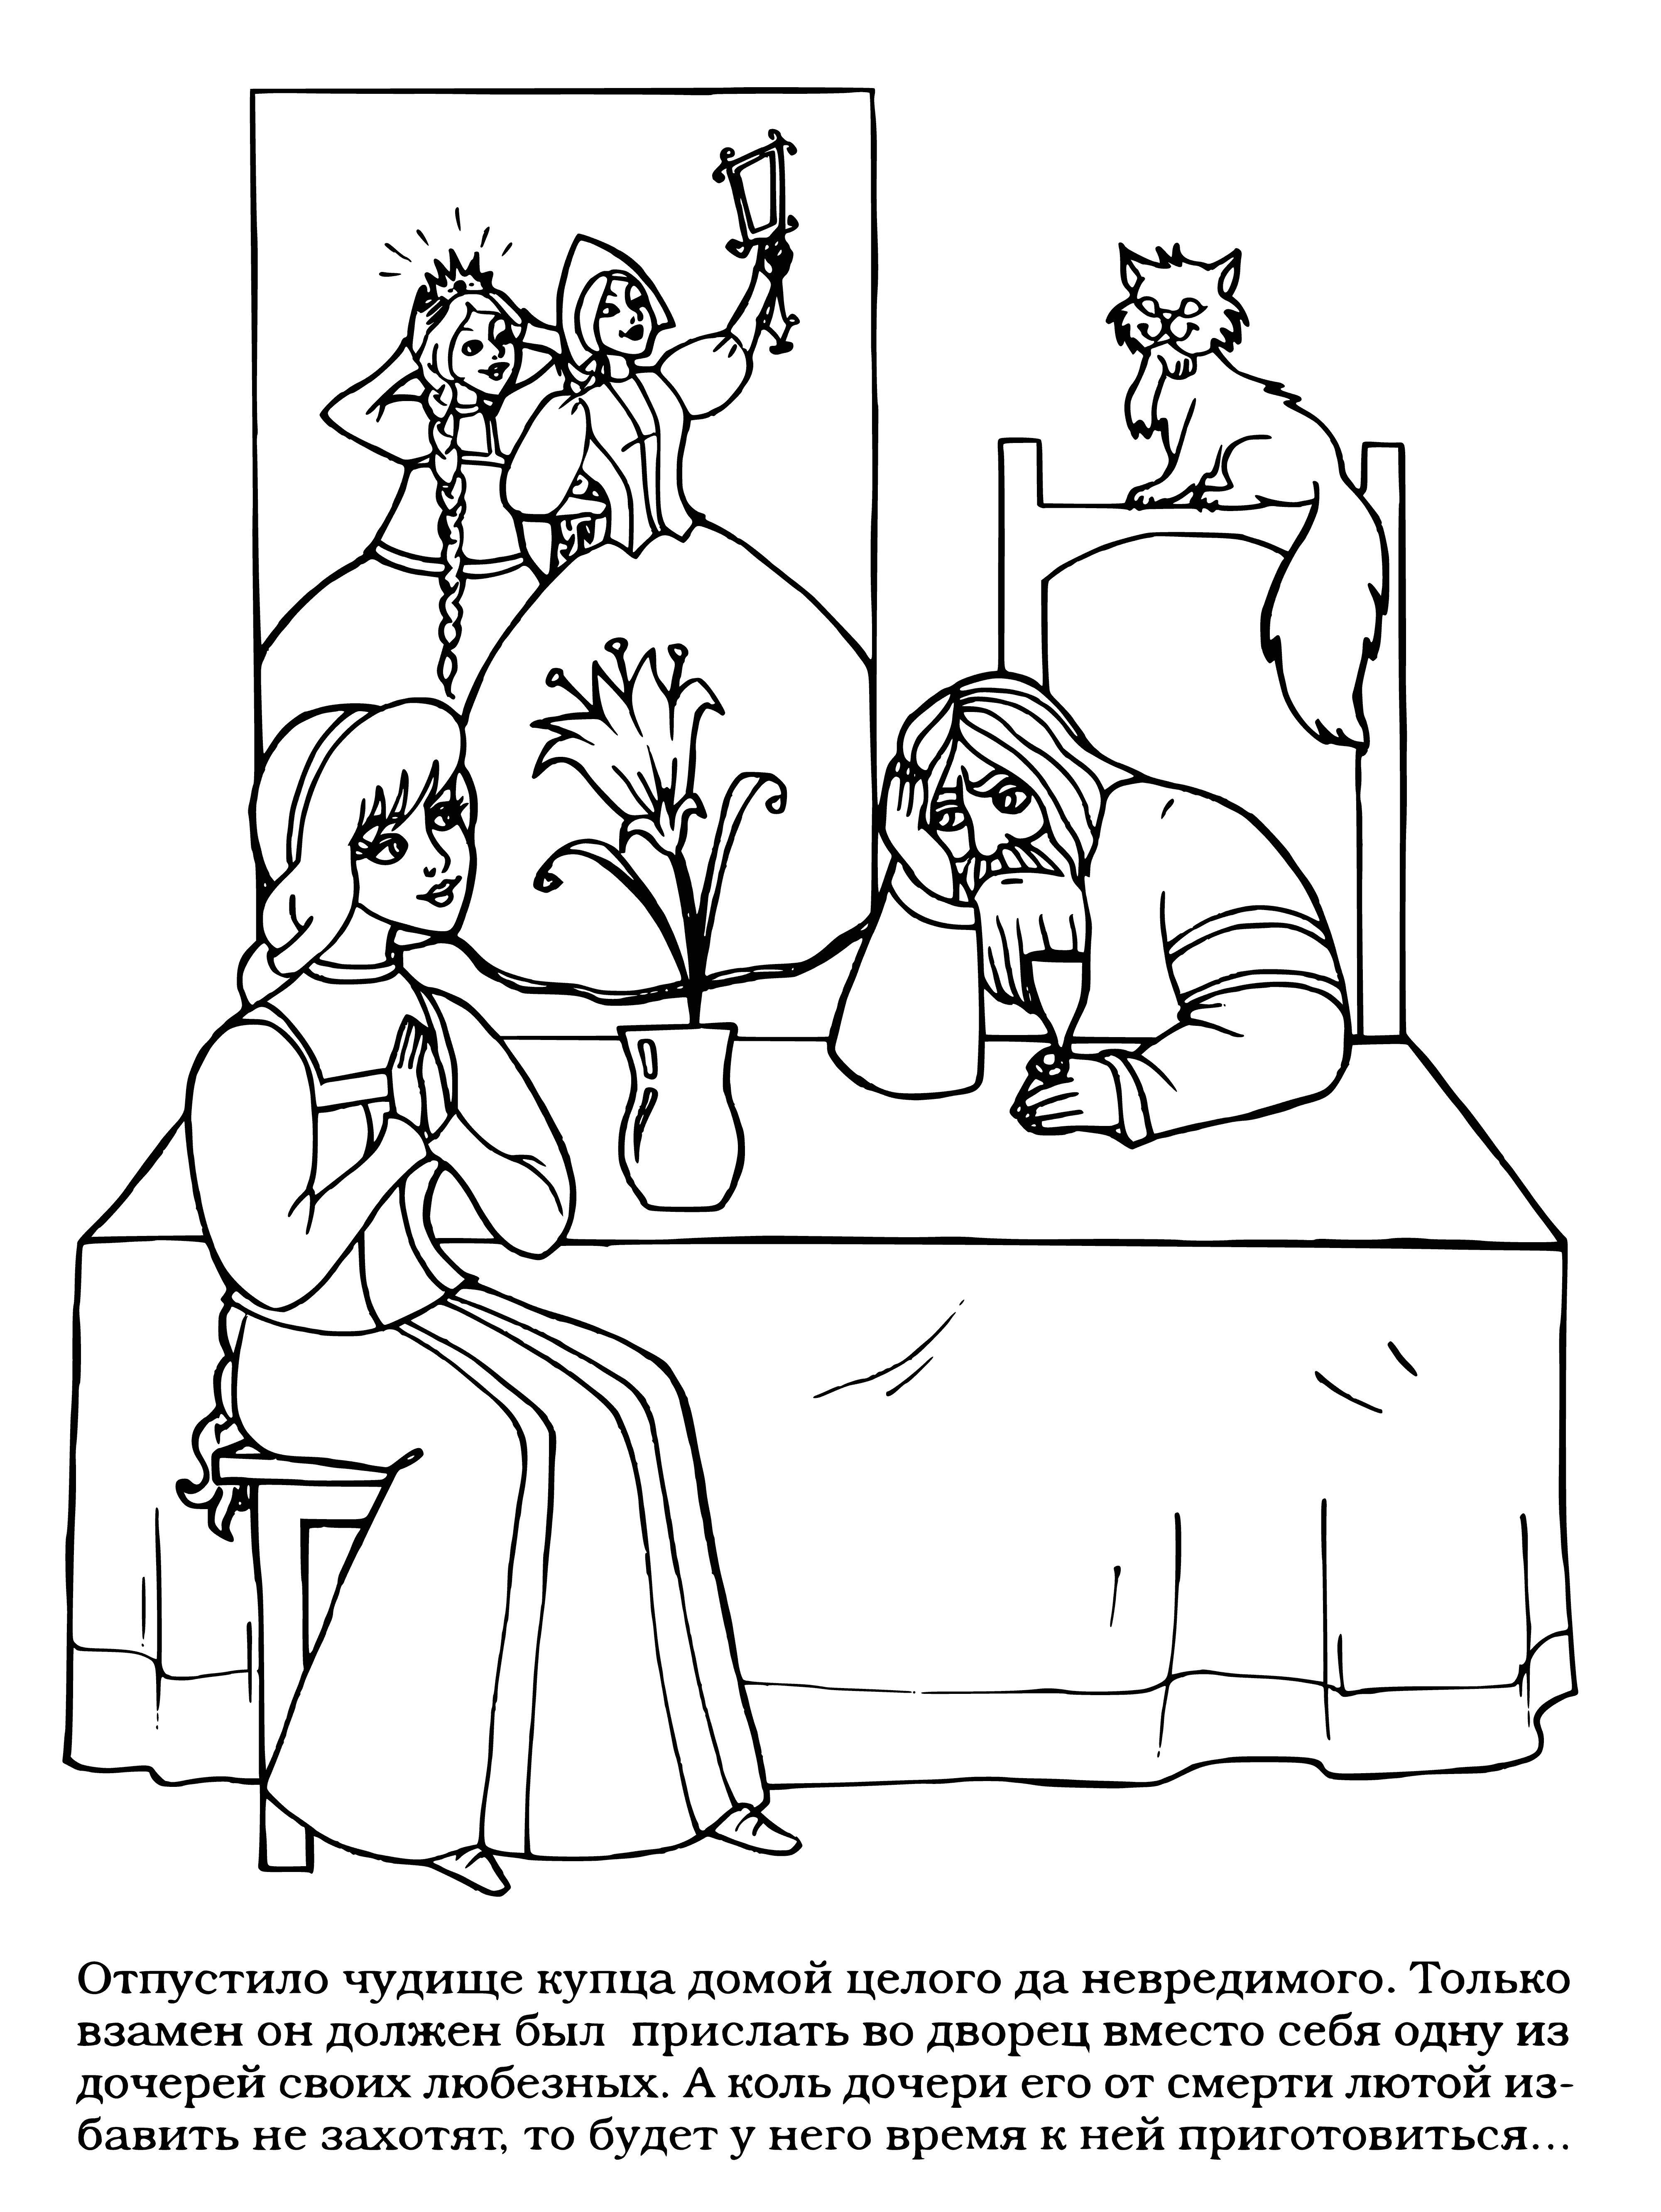 Merchant at home coloring page